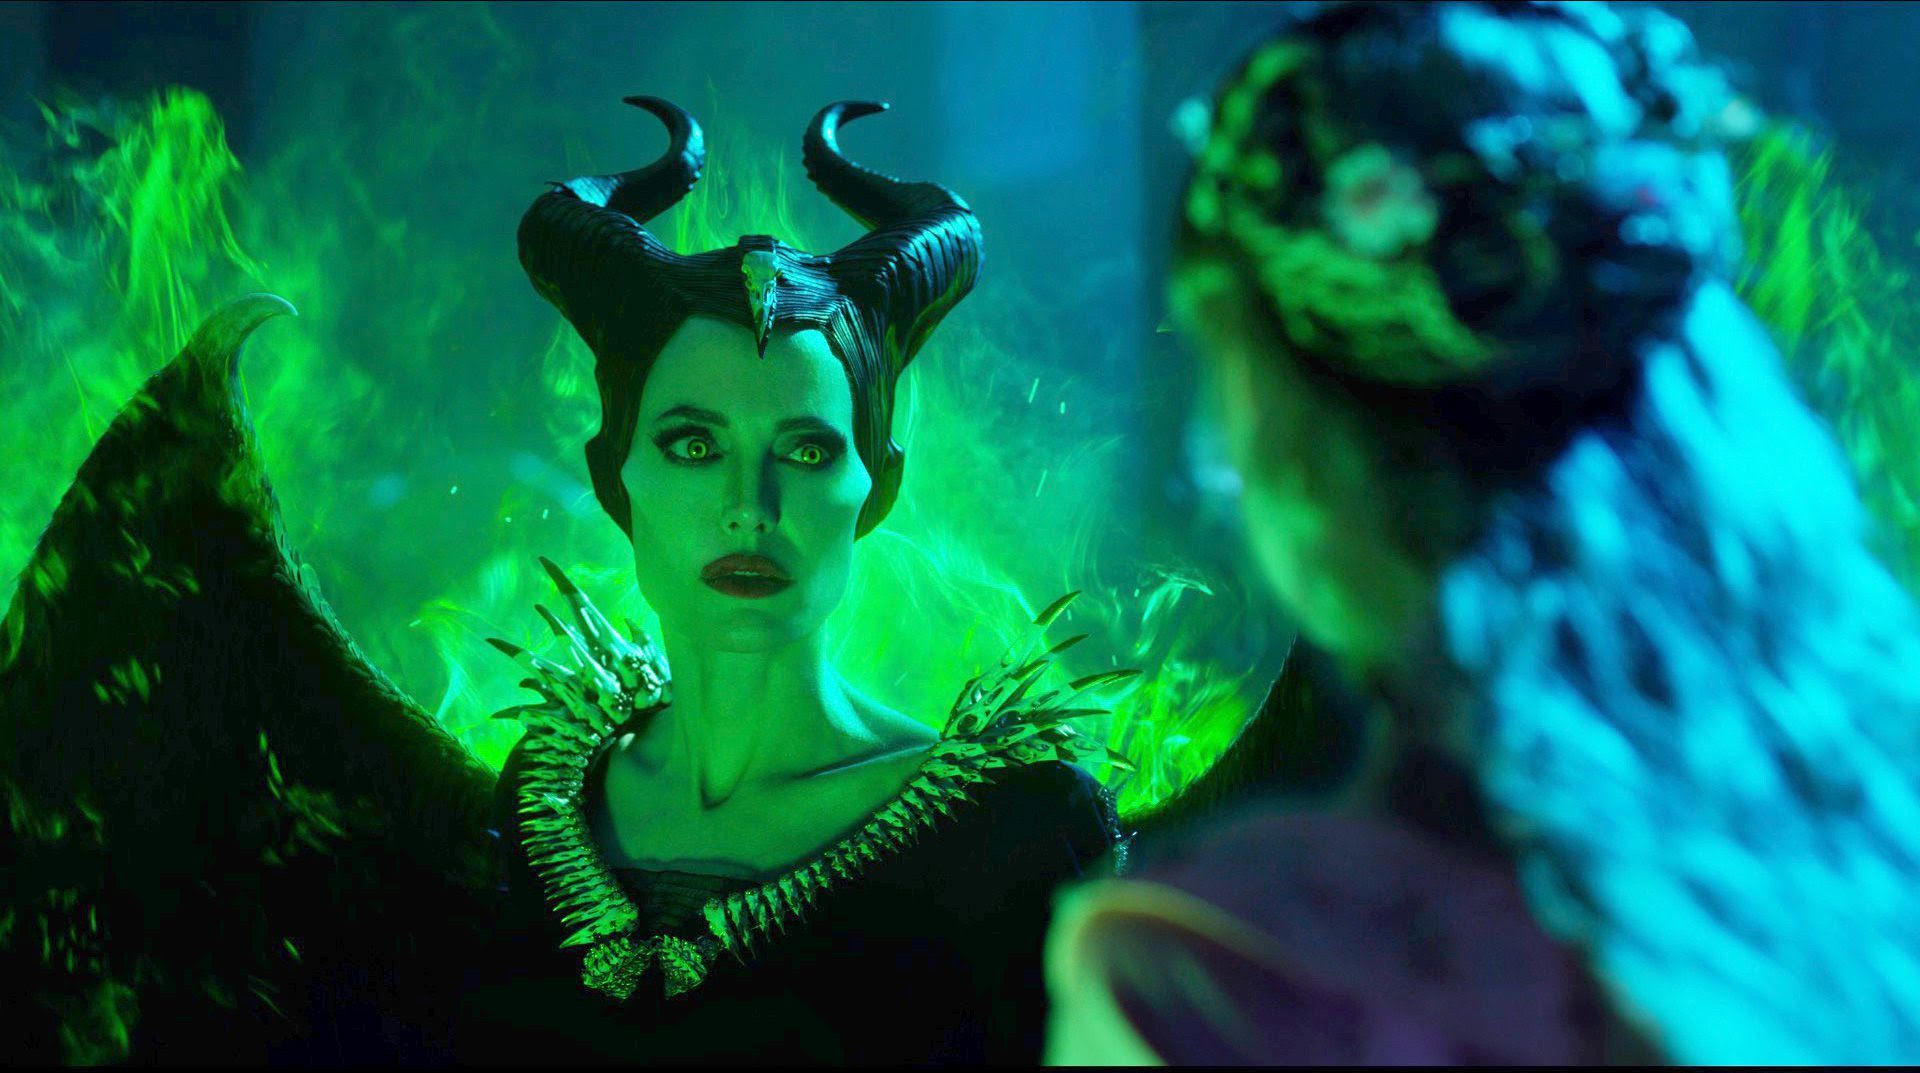 ‘Maleficent: Mistress of Evil’ Predicted To Reach $50 Million at the Box Office Opening Weekend